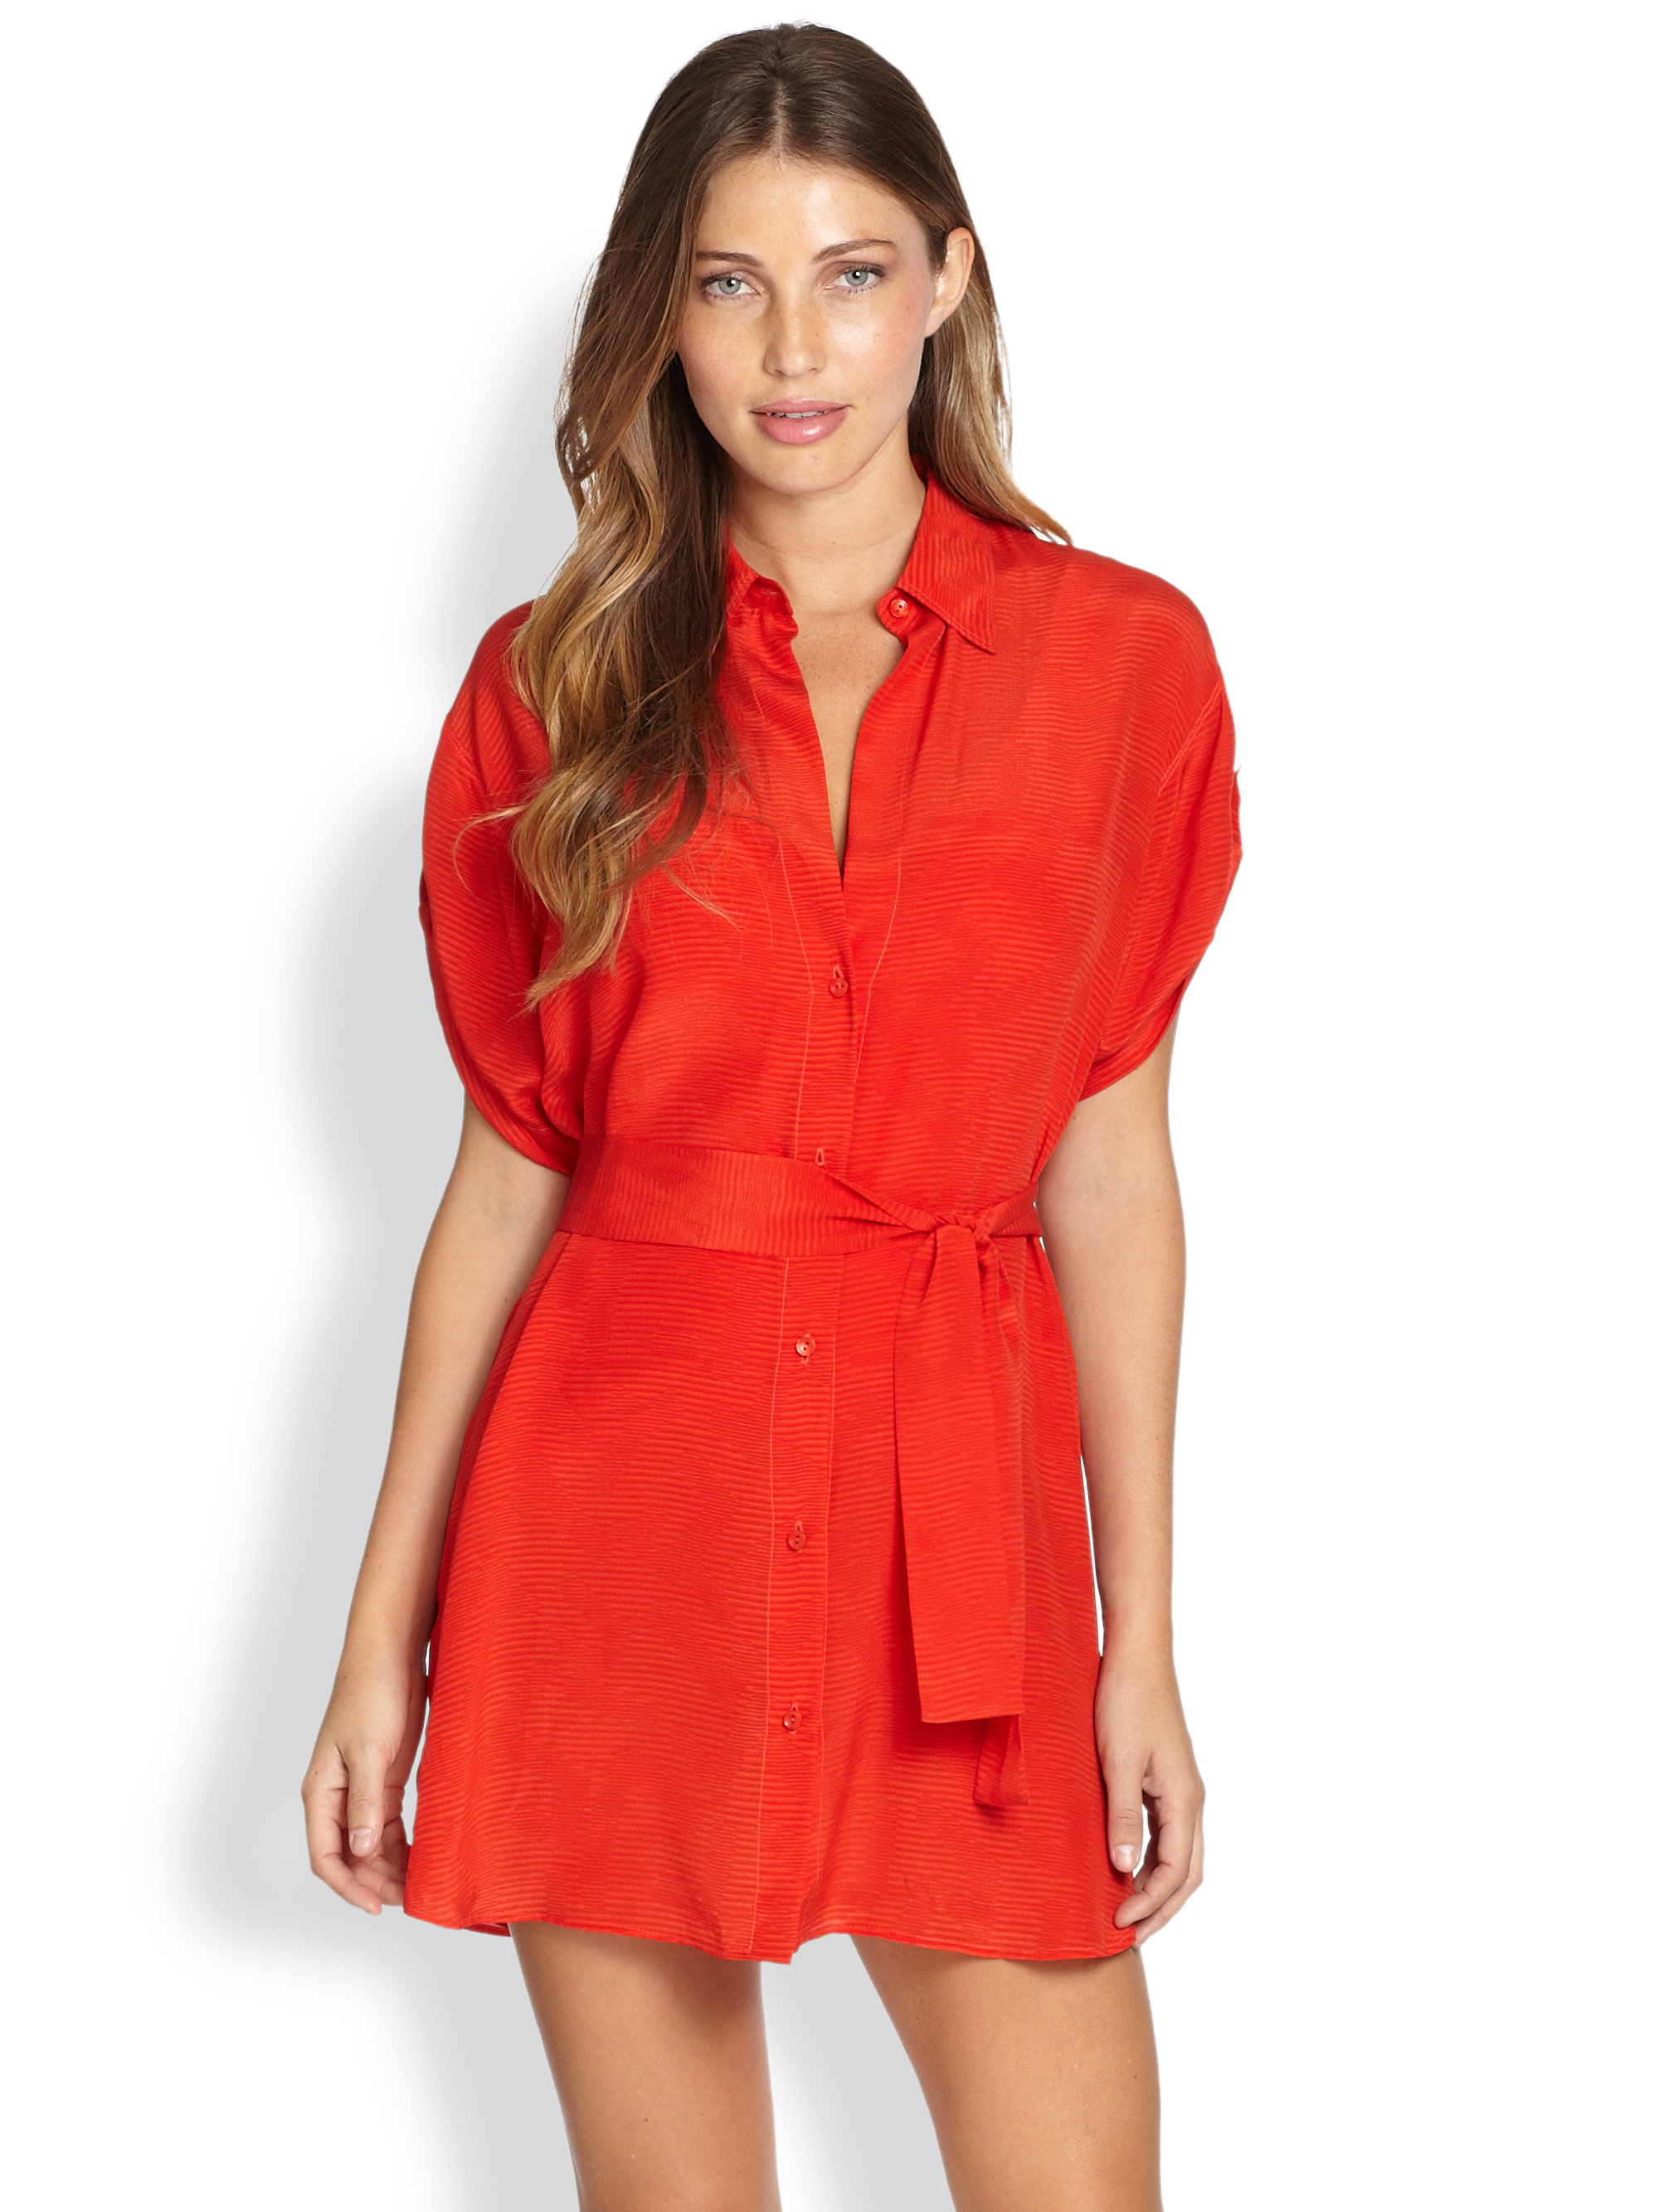 Lyst - Gottex Architecture Silk Cover-Up Shirtdress in Red